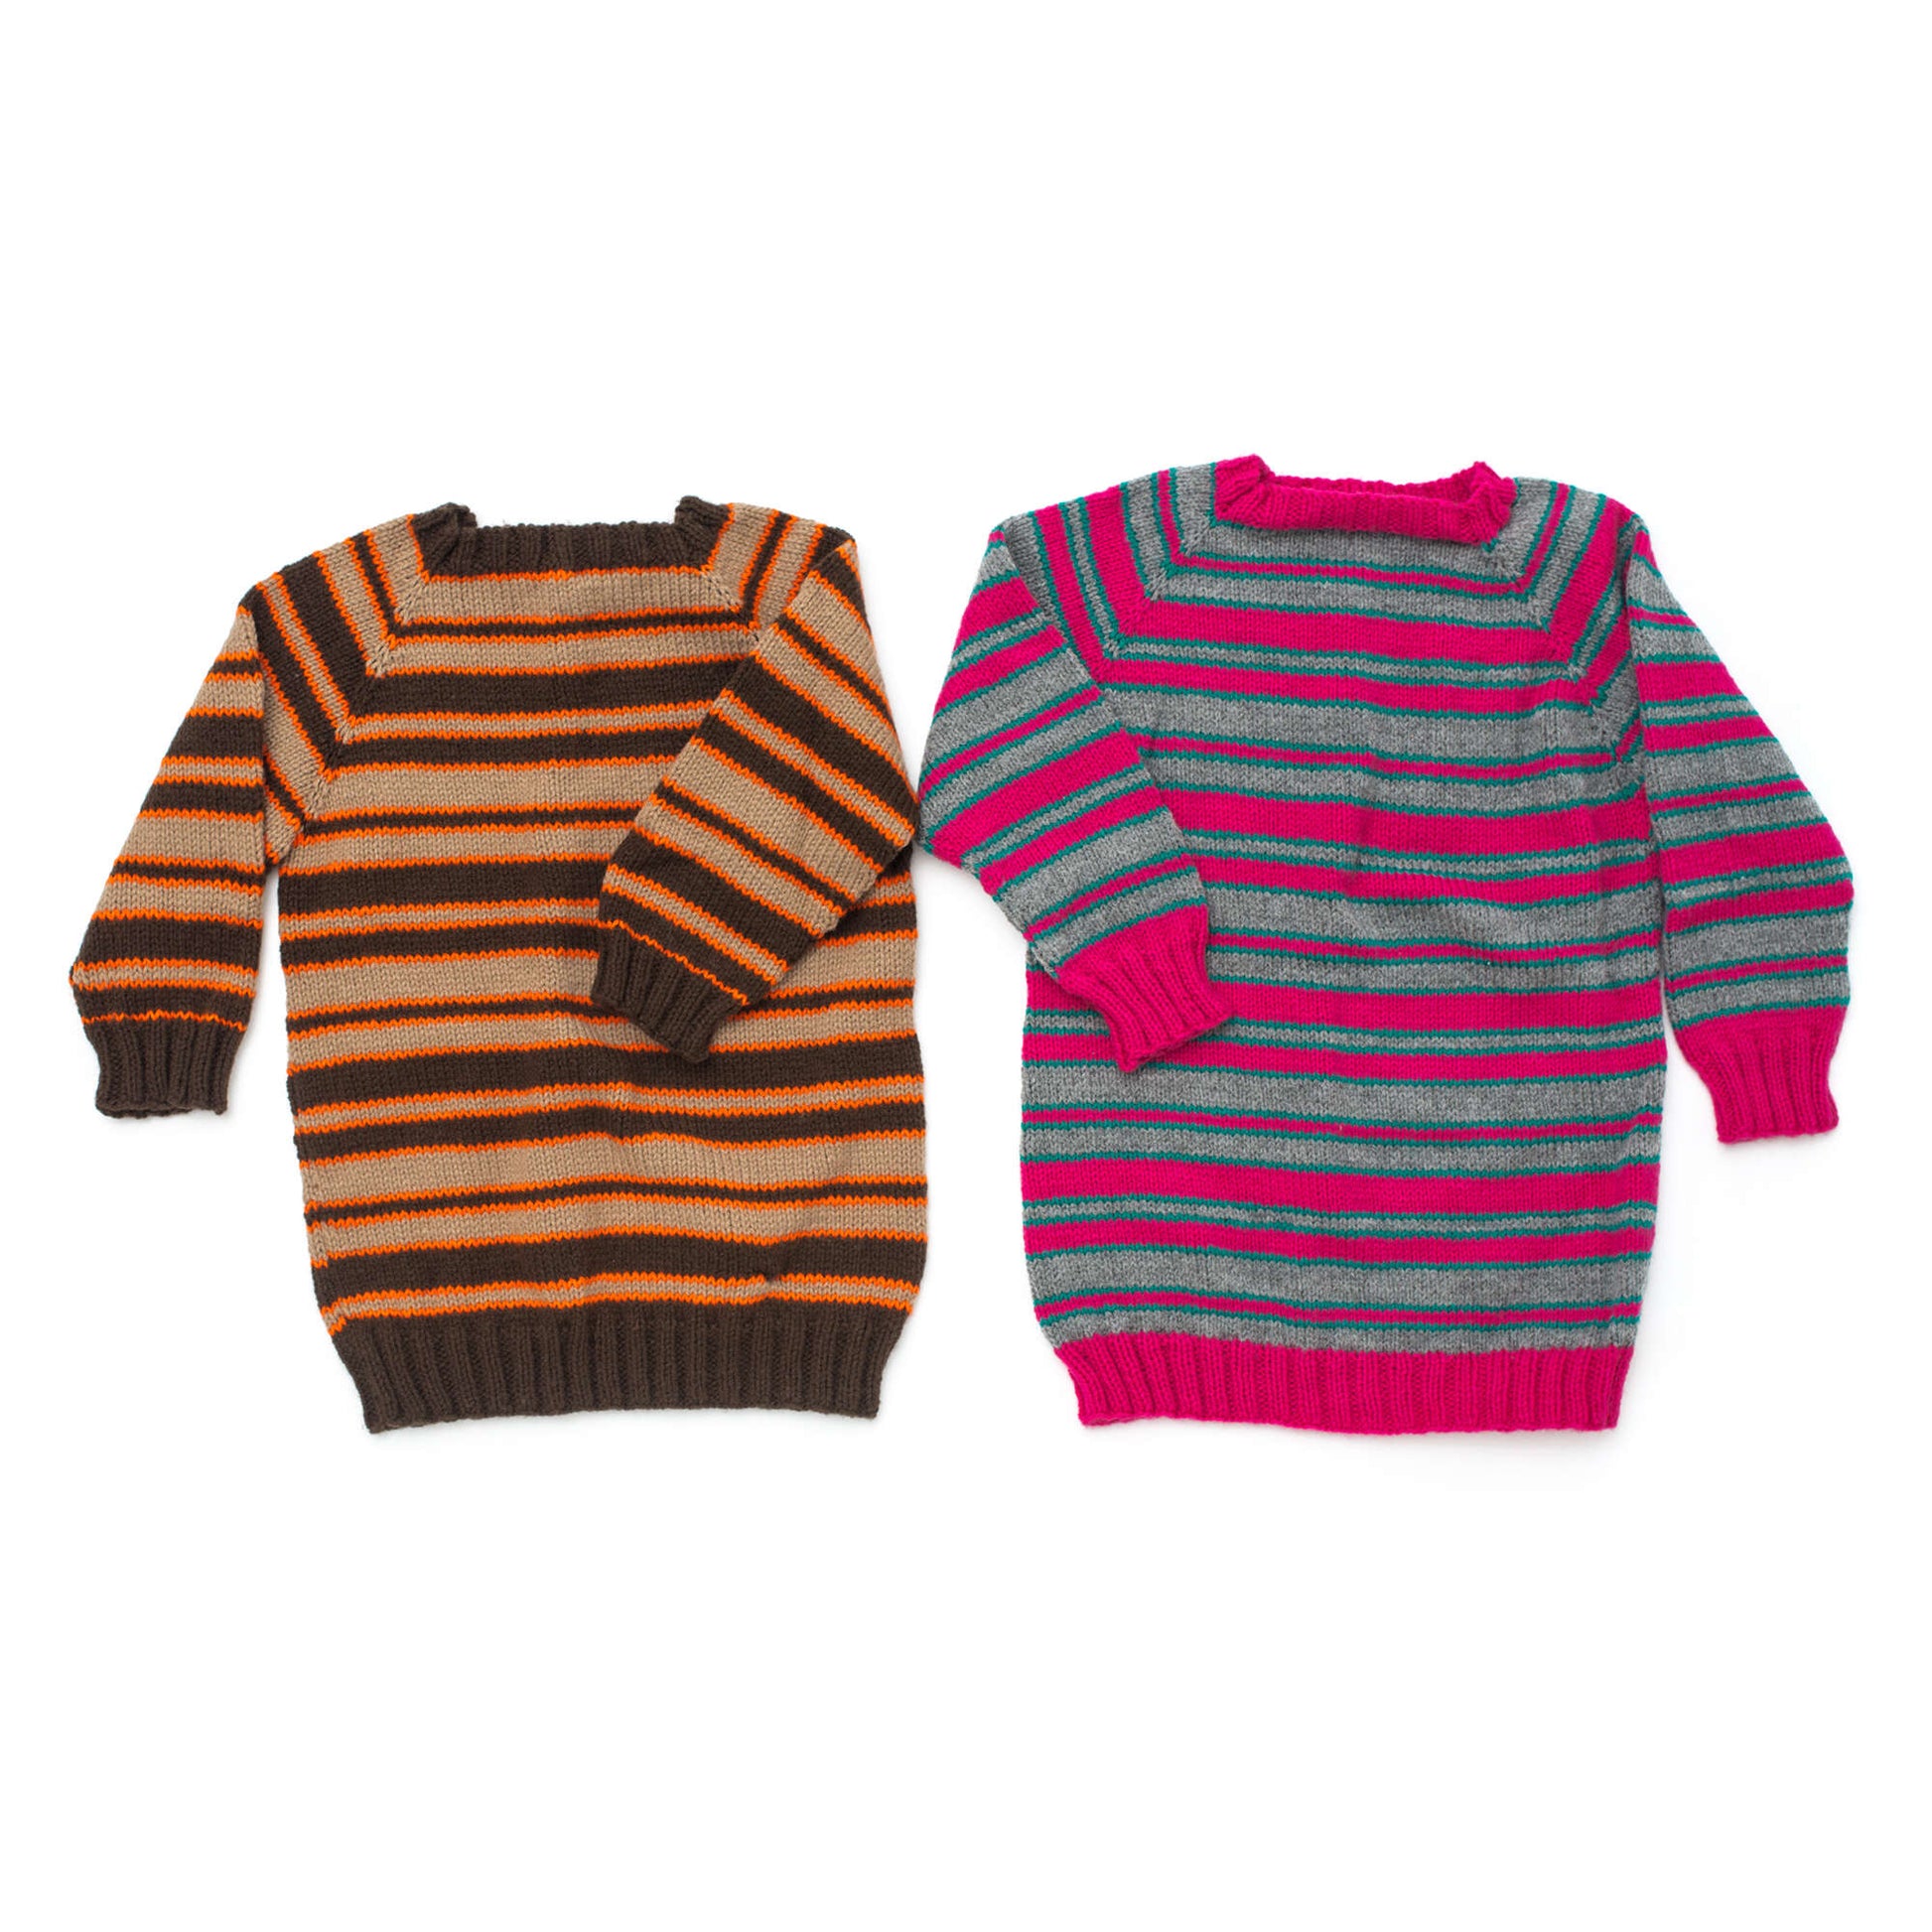 Free Patons Top Down Super Stripes Sweater Knit Pattern